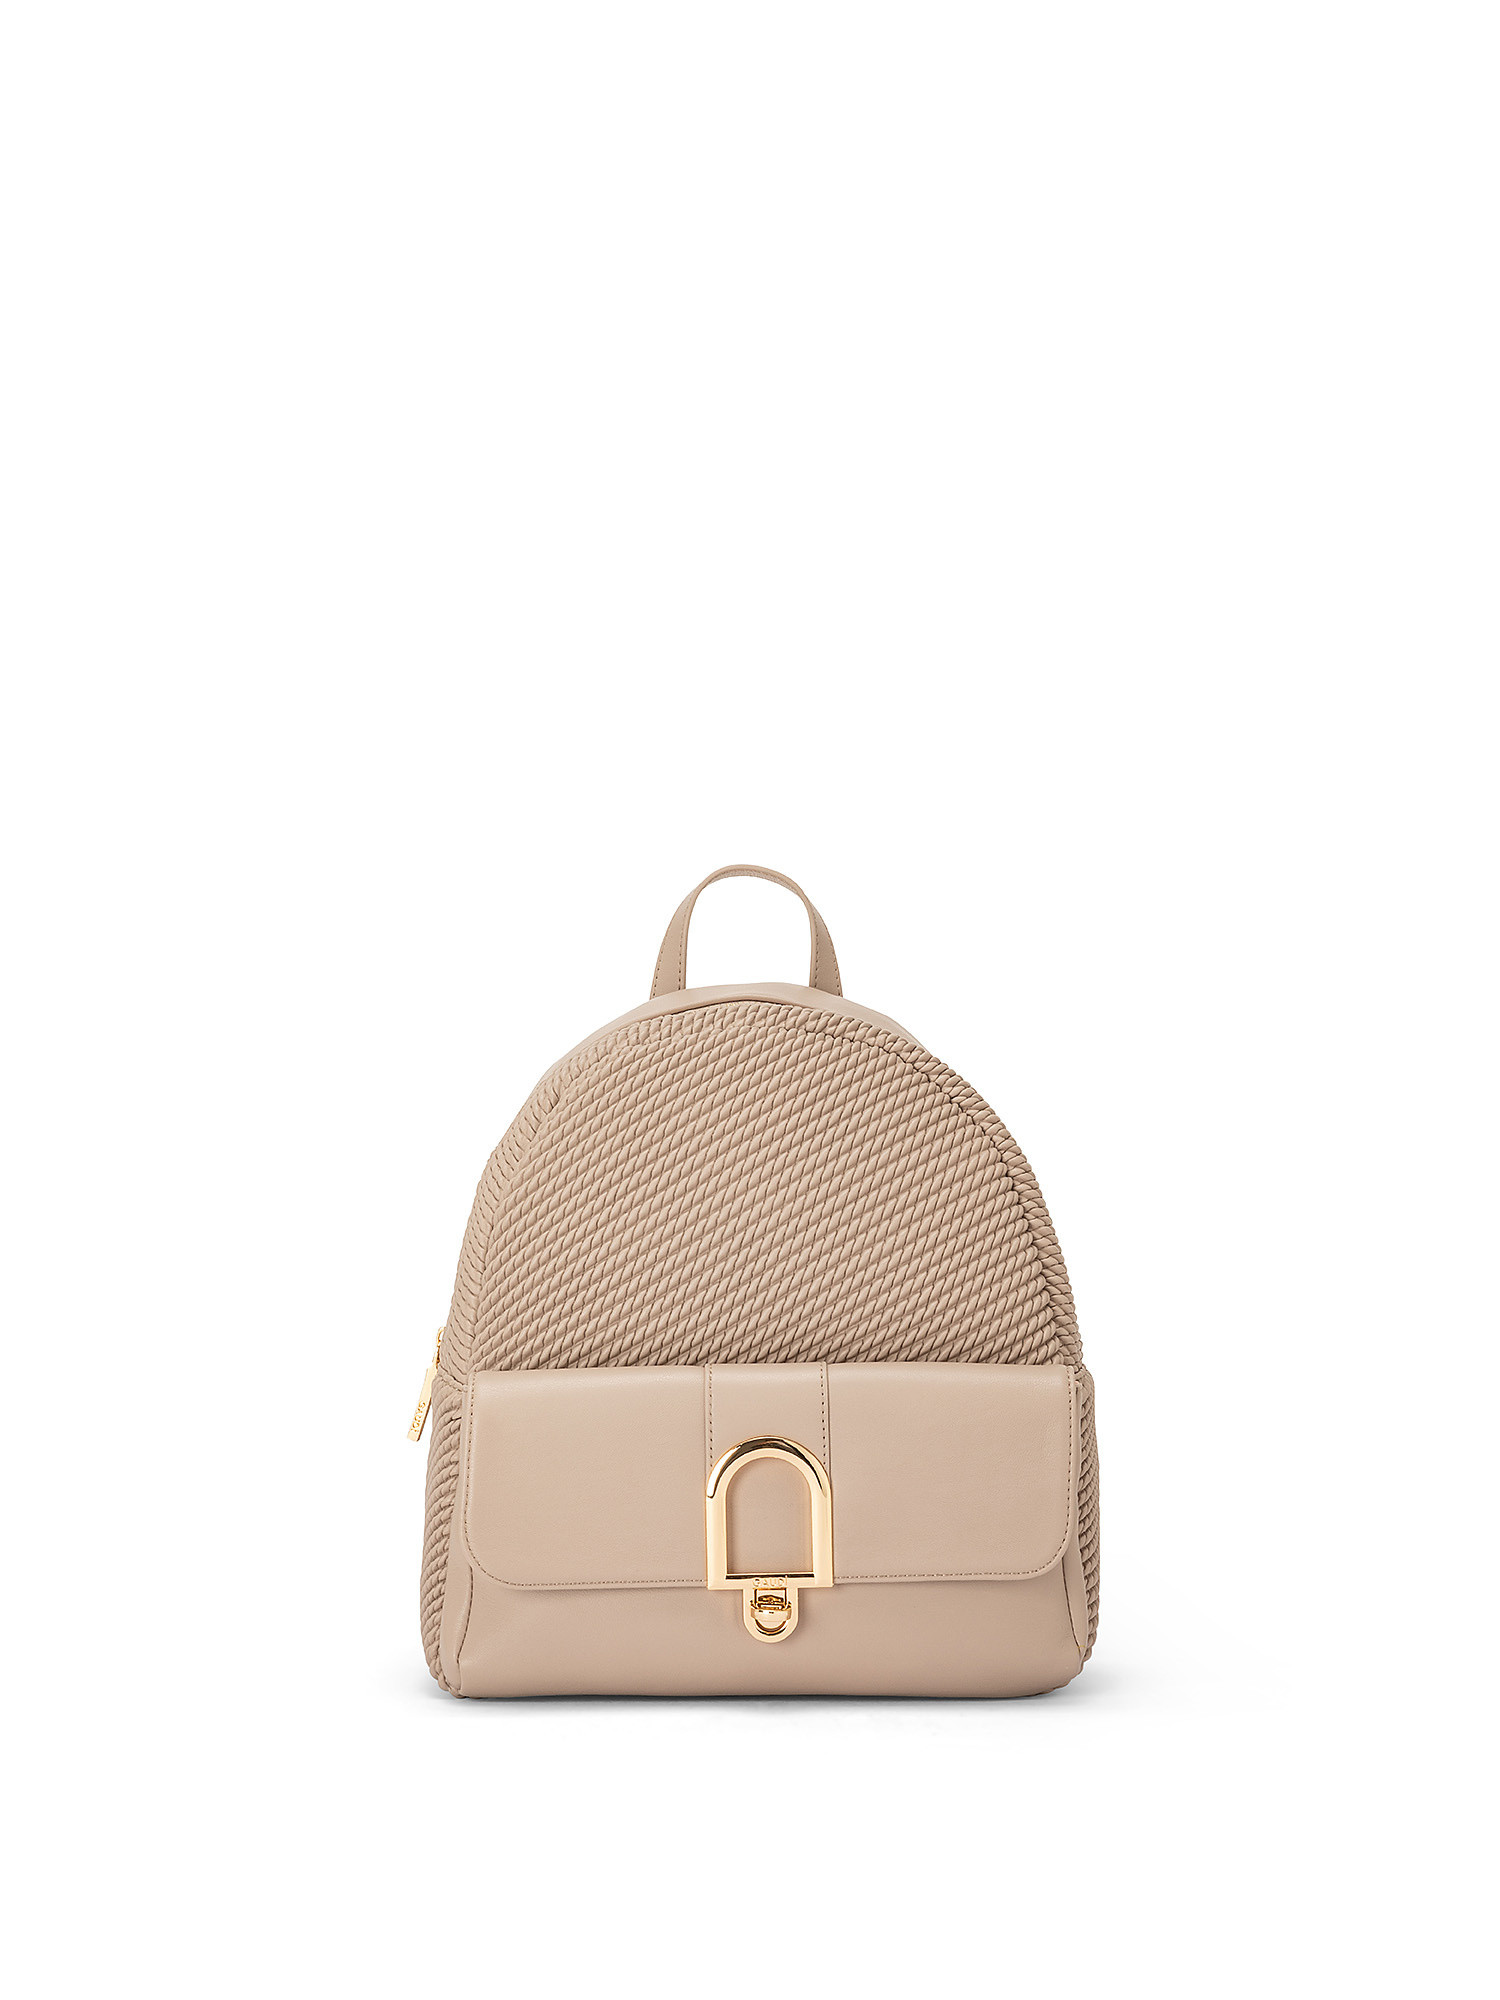 Thalissa backpack, Dove Grey, large image number 0